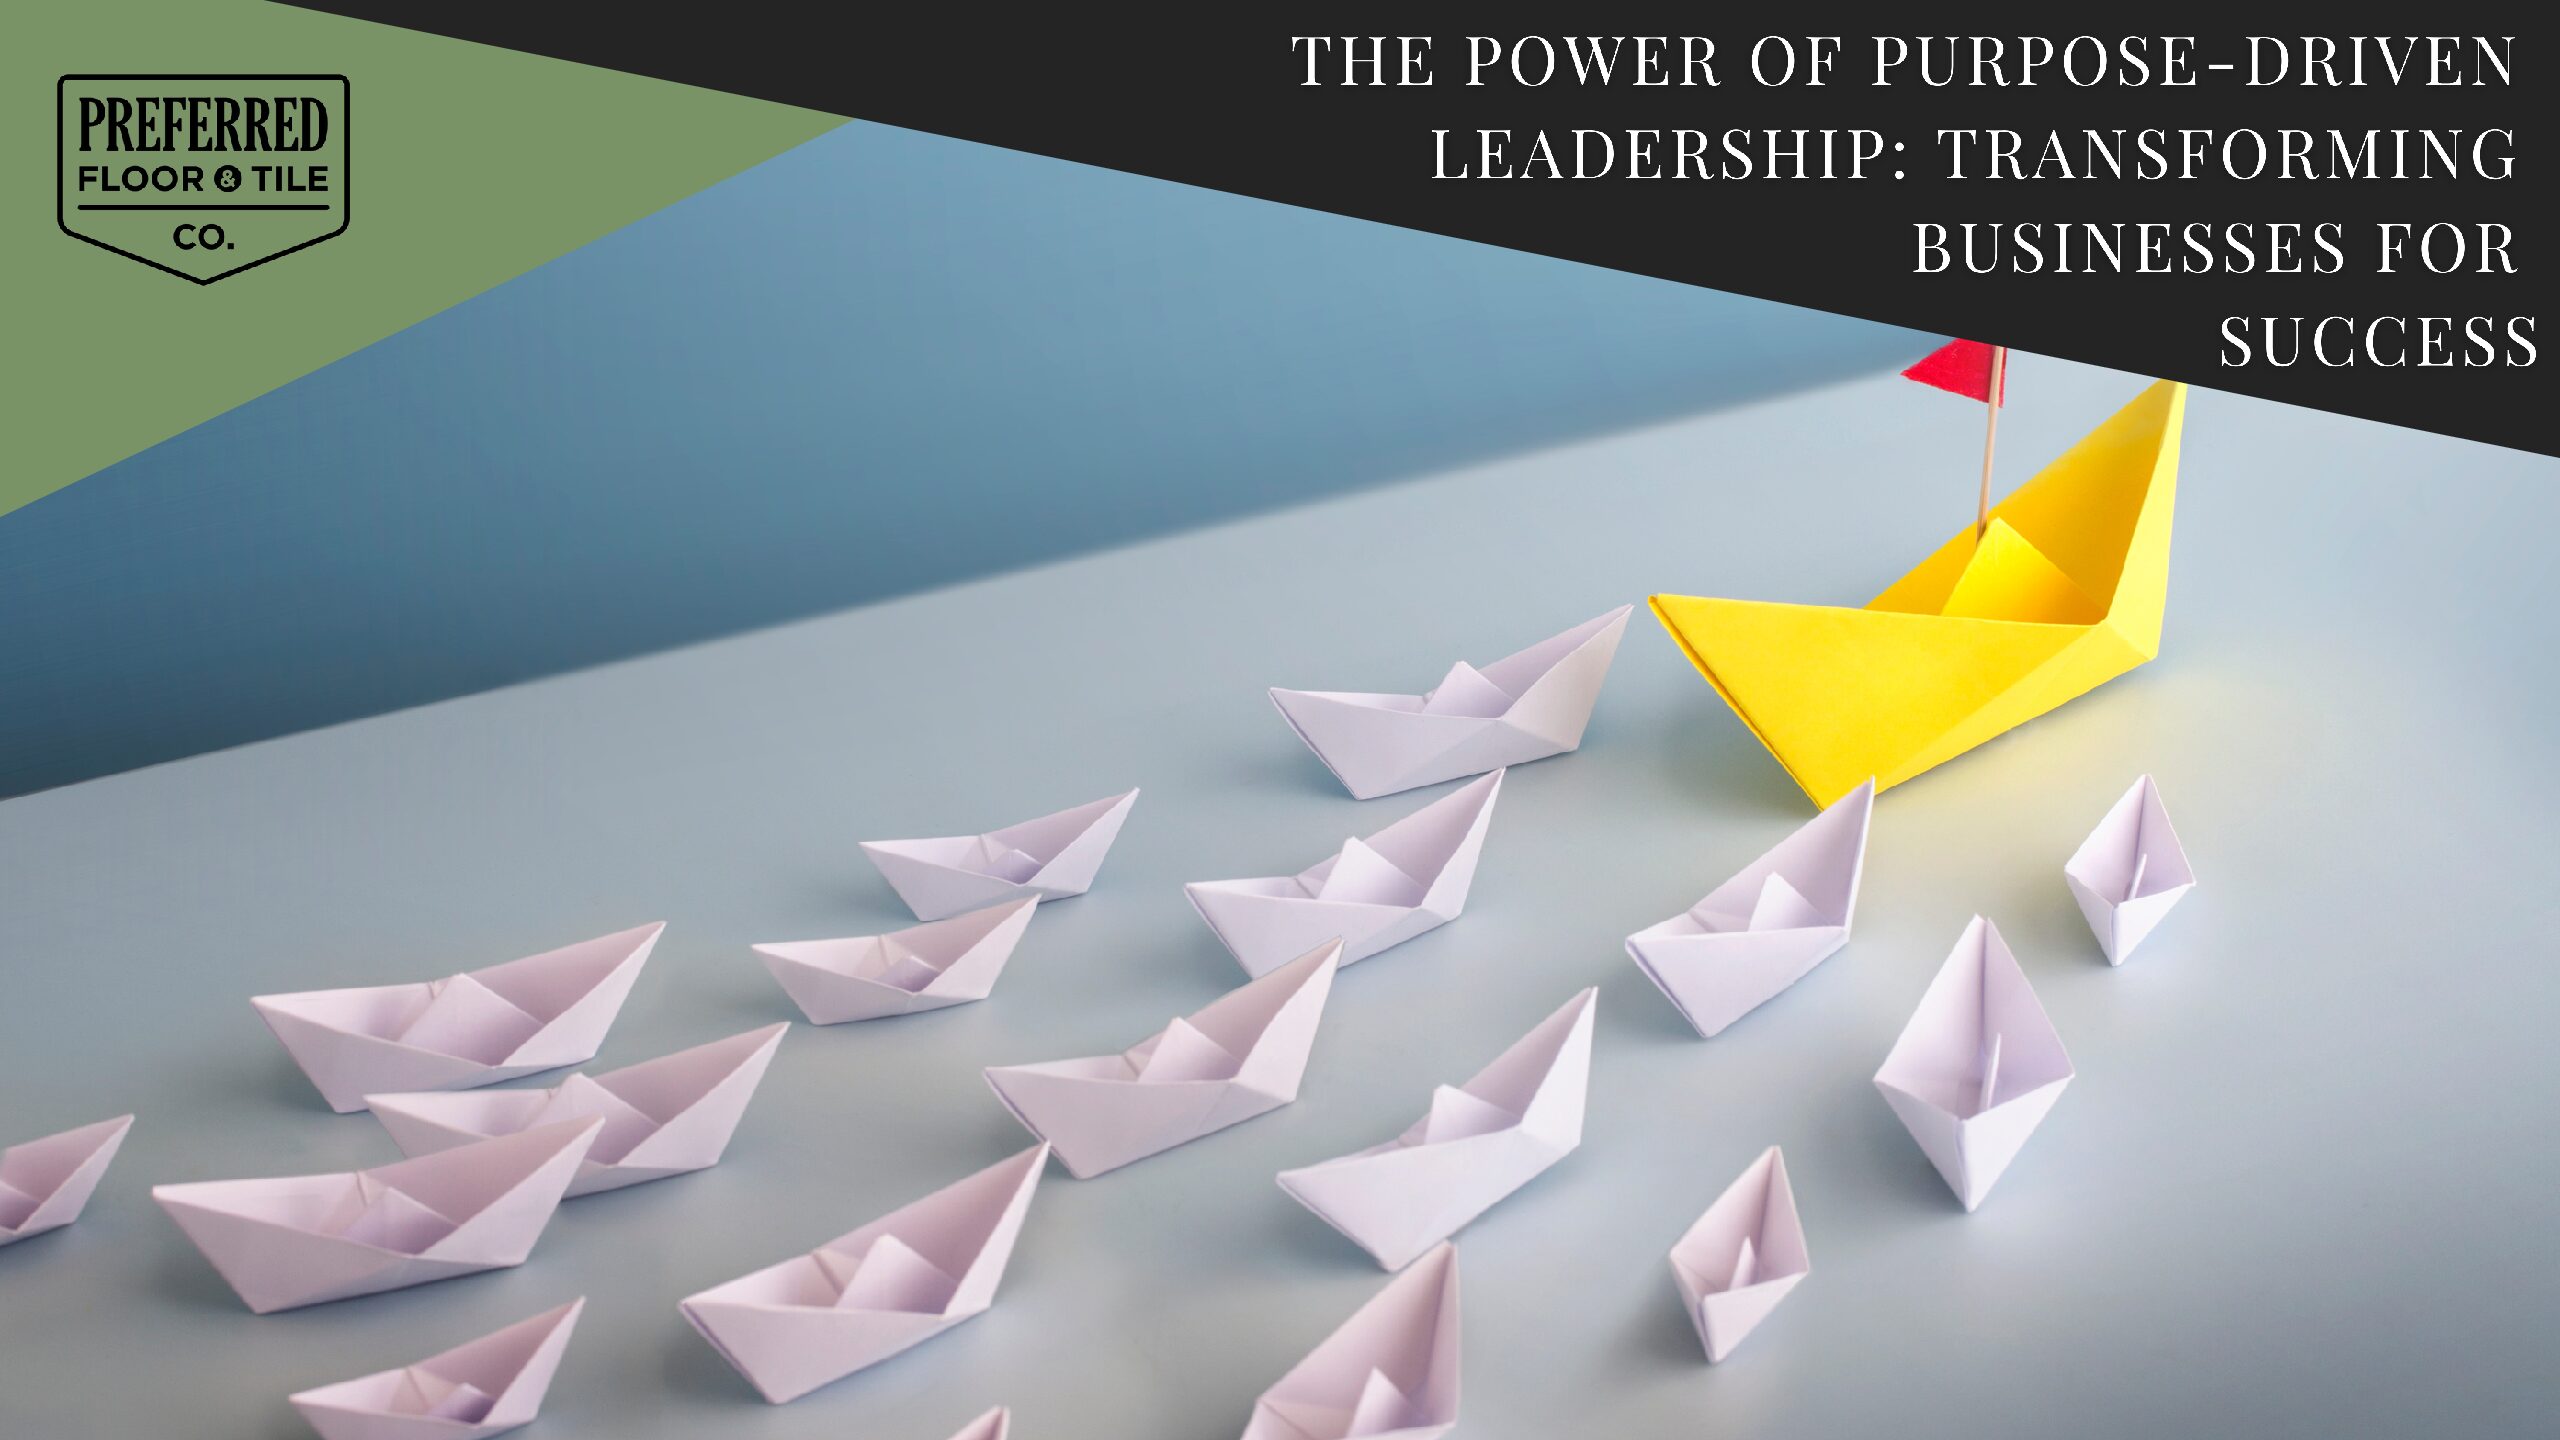 The Power of Purpose-Driven Leadership: Transforming Businesses for Success